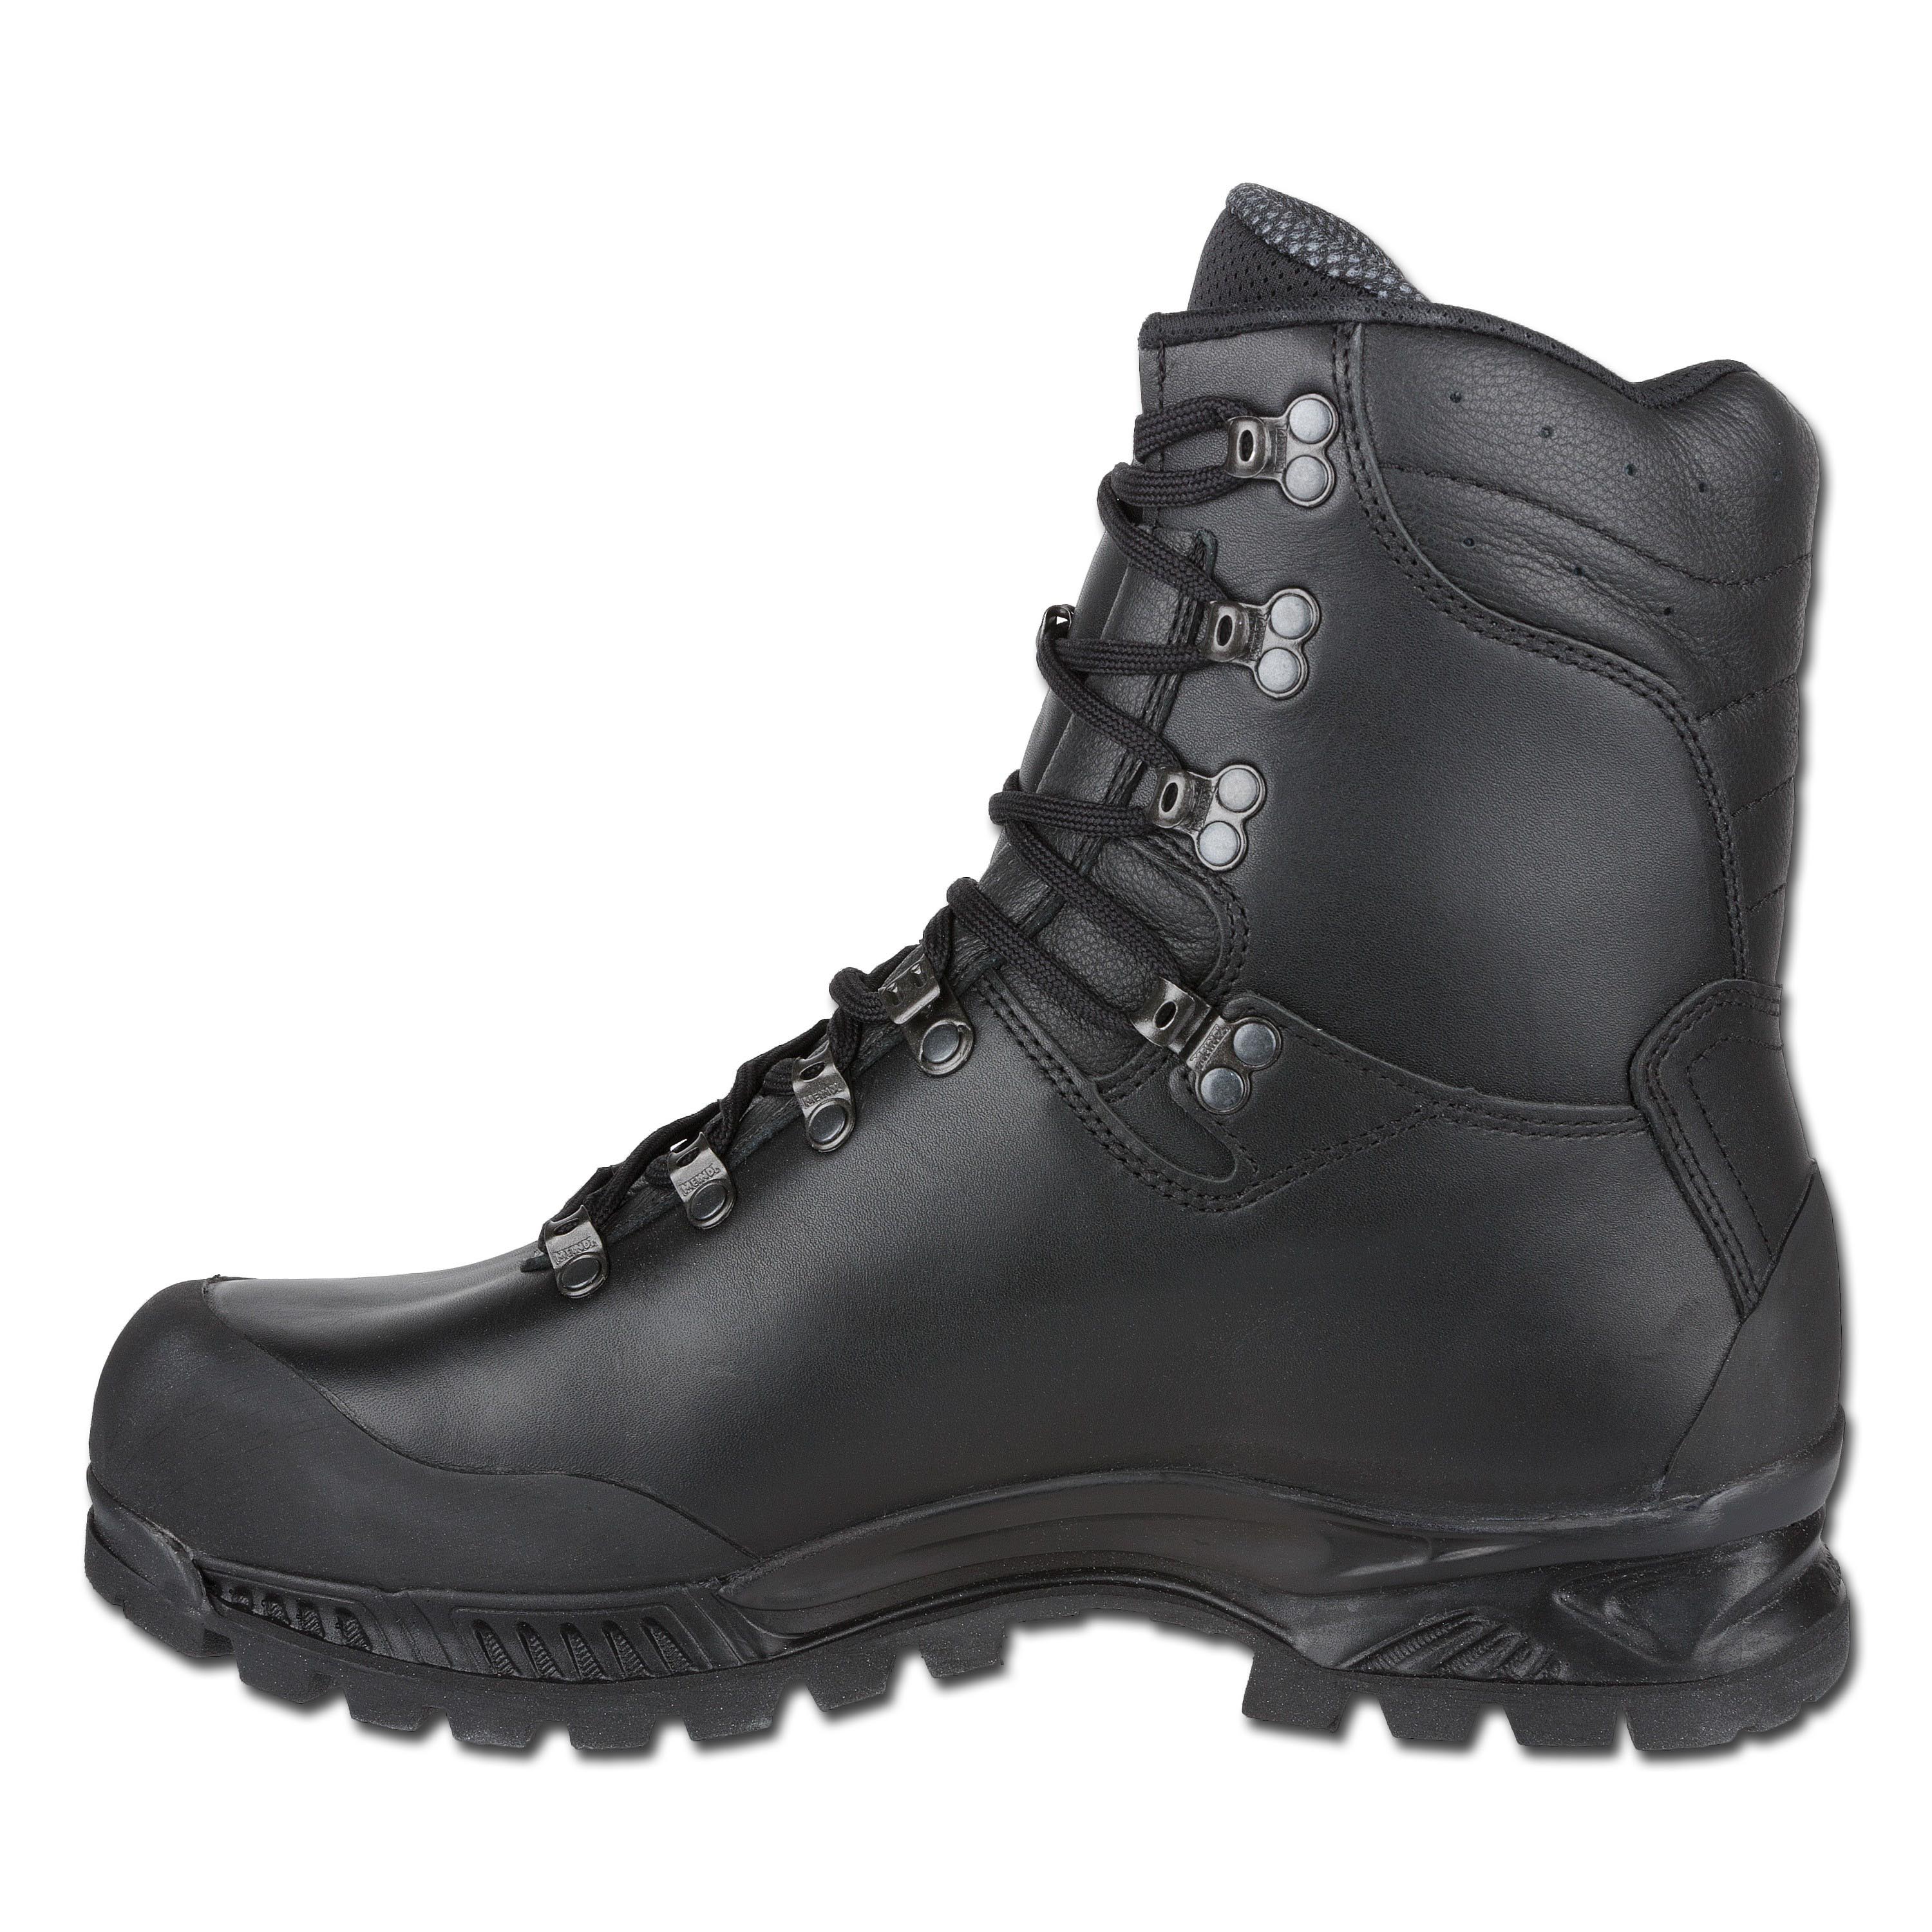 Boots Meindl WI12 Cold Climate | Boots Meindl WI12 Cold Climate ...